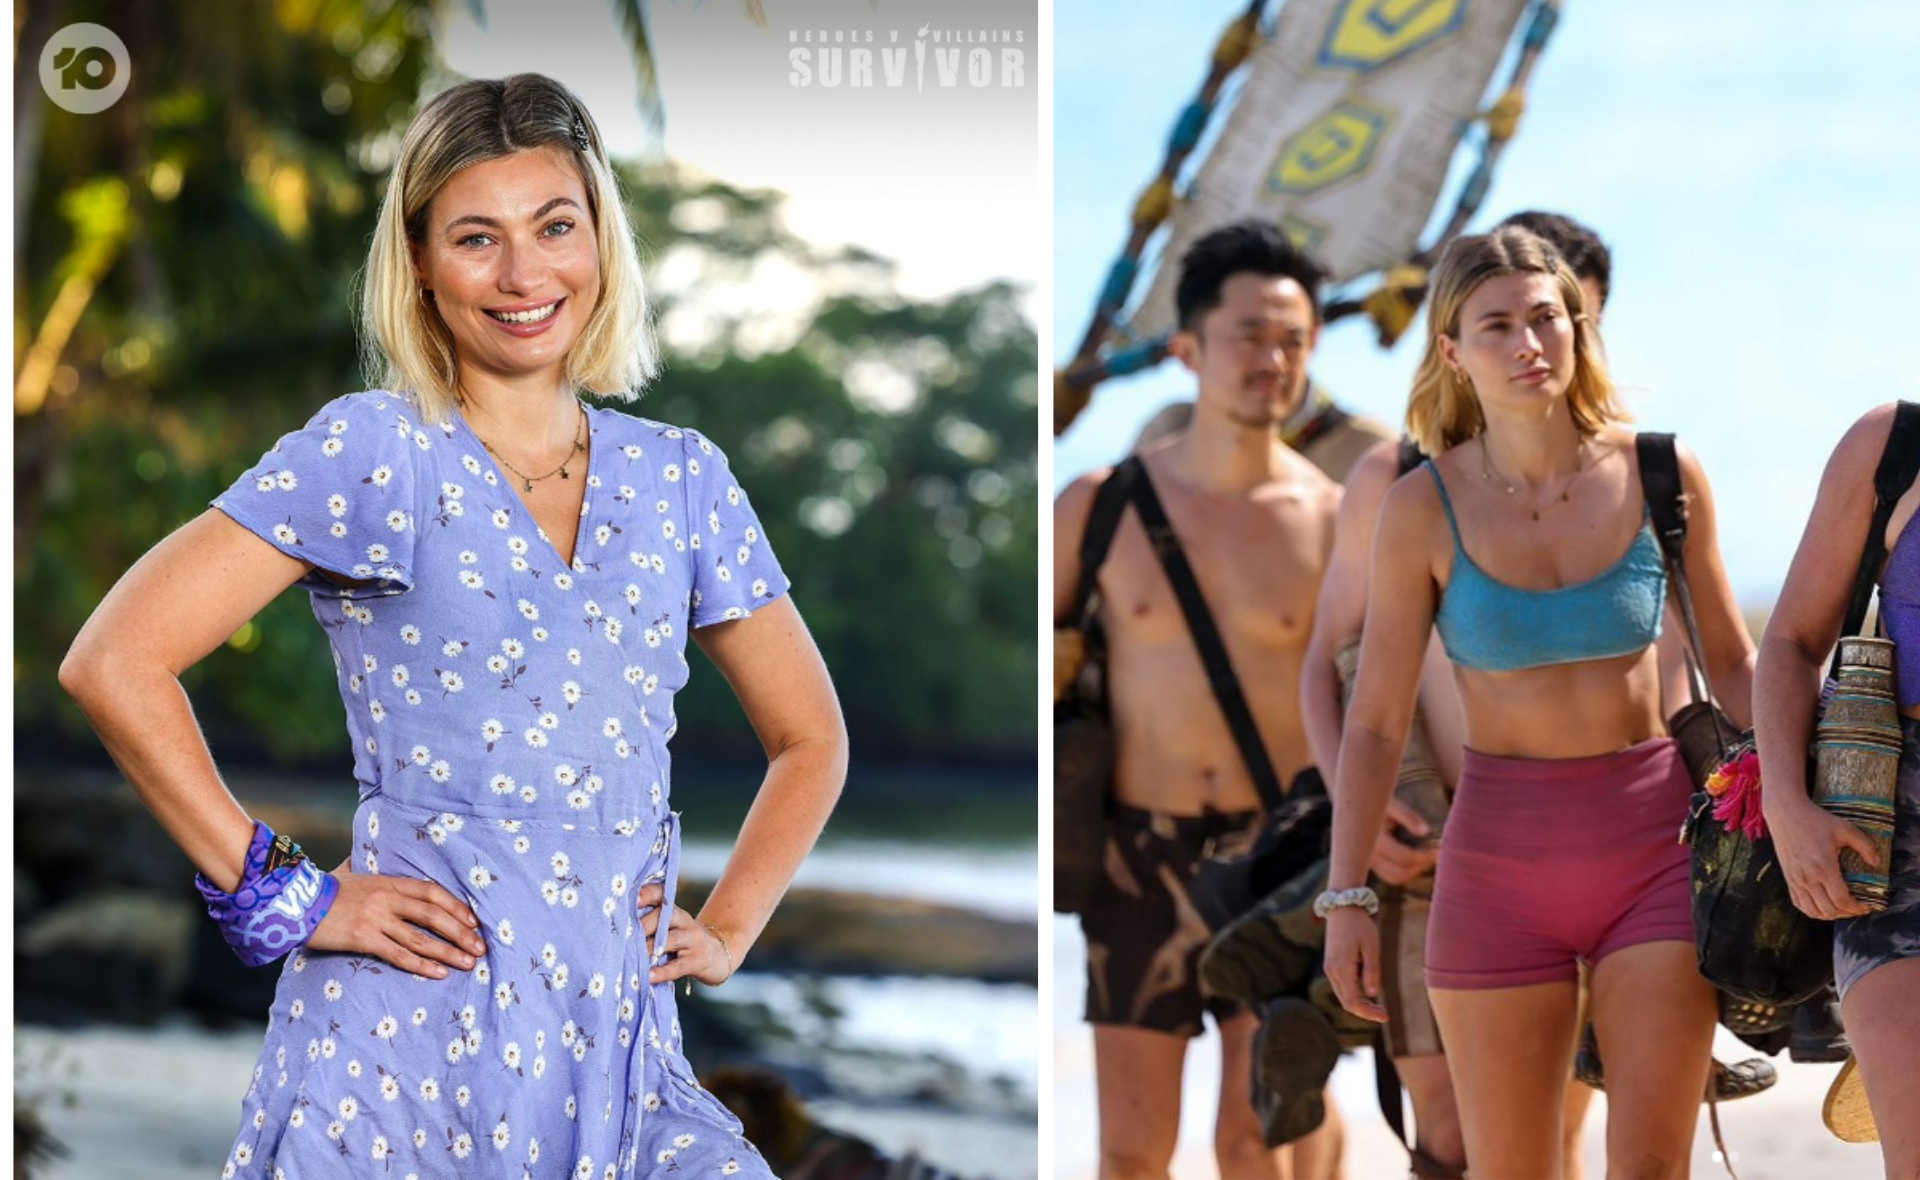 Australian Survivor: Evictee Shonee reveals what really happens when cameras are off